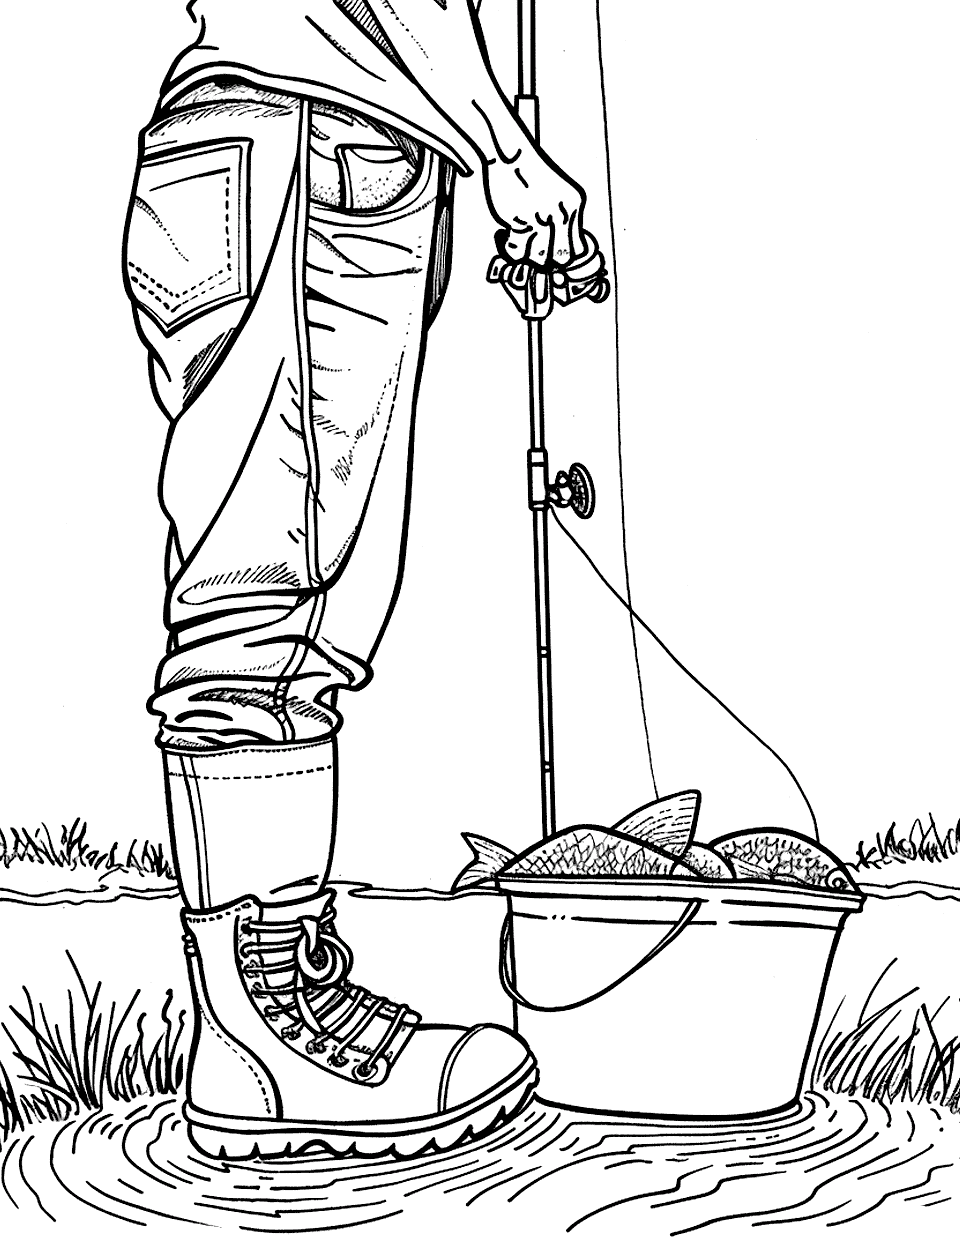 Fishing Waders by the River Shoe Coloring Page - Guy wearing Fishing waders with a fishing pole and a bucket of fish.